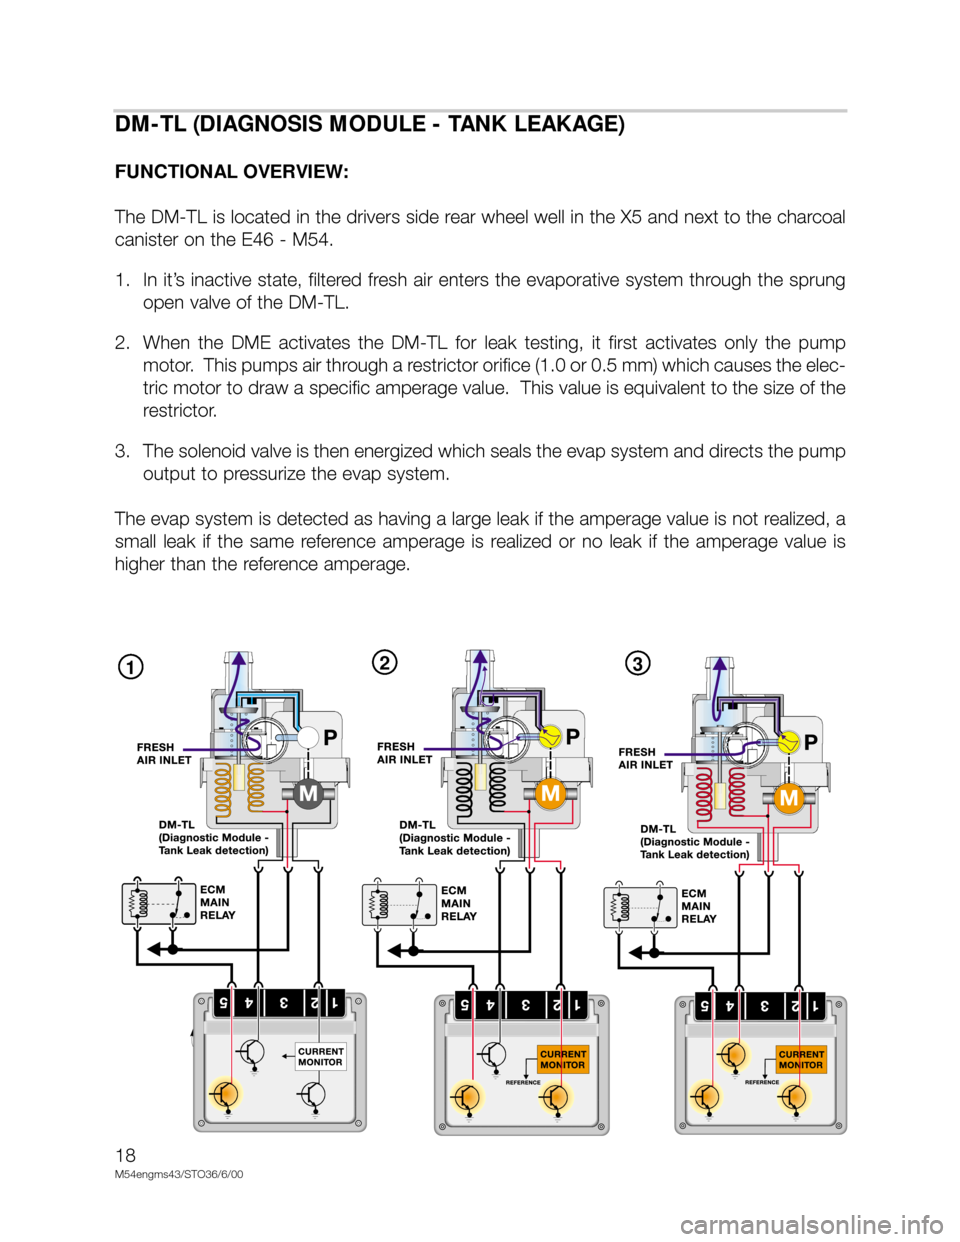 BMW X5 2005 E53 M54 Engine User Guide 18
M54engms43/STO36/6/00
123
DM-TL (DIAGNOSIS MODULE - TANK LEAKAGE)
FUNCTIONAL OVERVIEW:
The DM-TL is located in the drivers side rear wheel well in the X5 and next to the charcoal
canister on the E4